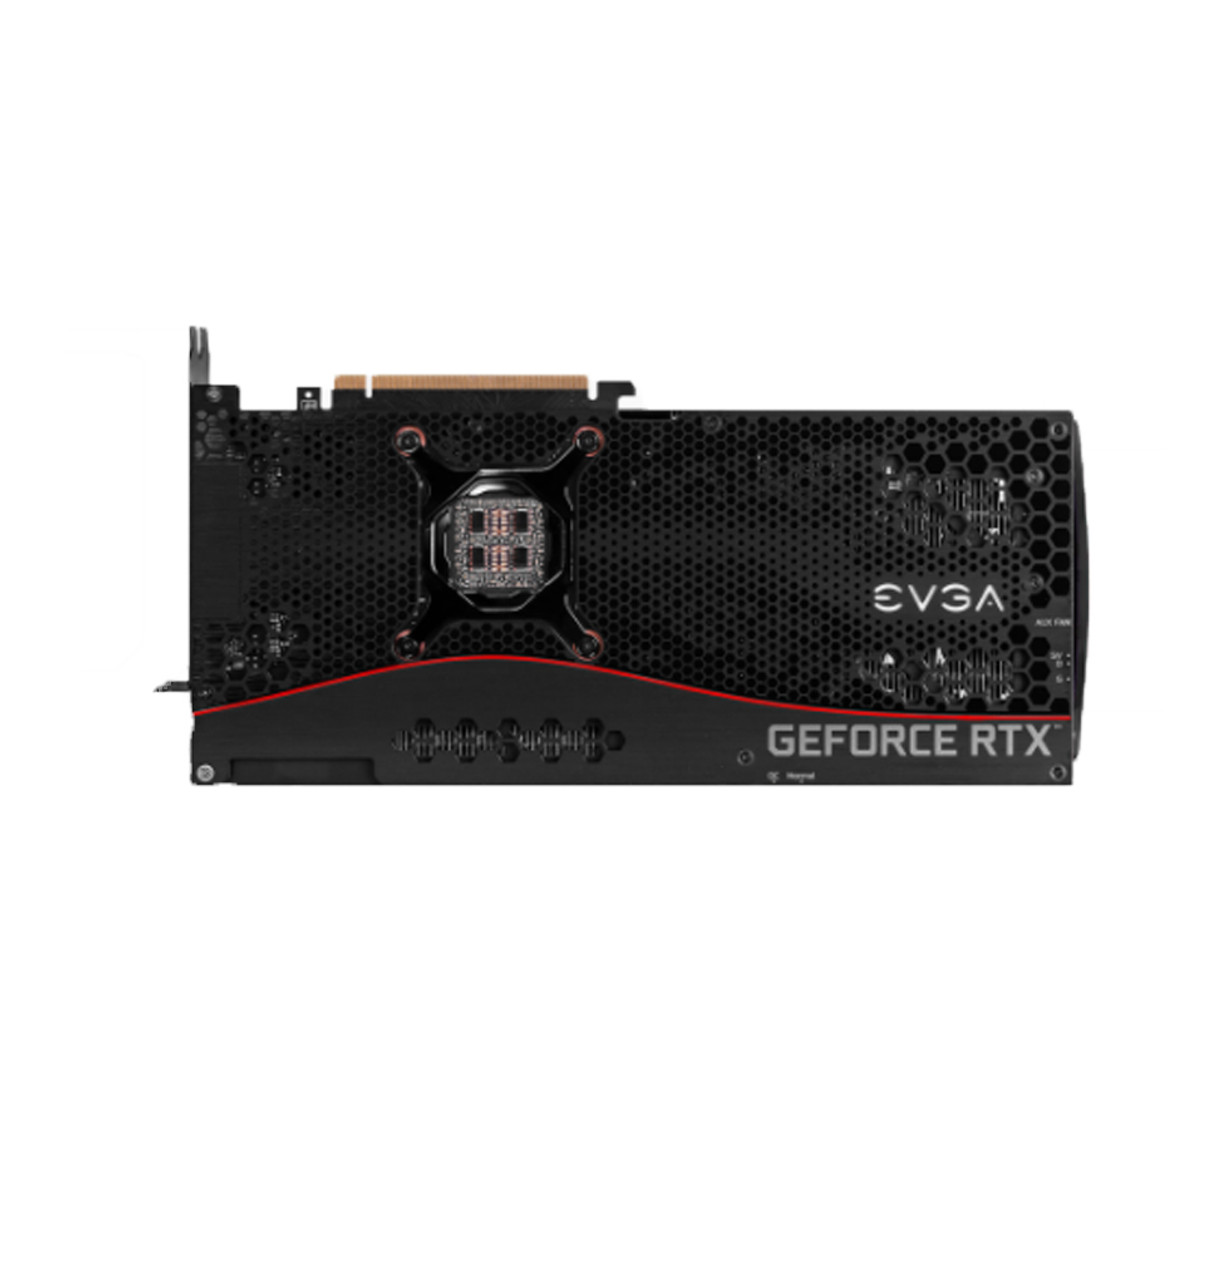 EVGA  10G-P5-3897-KL GeForce RTX 3080 FTW3 Ultra Gaming,10GB GDDR6X, iCX3 Technology, ARGB LED, Metal Backplate, LHR (lite hash rate) (Limited supply, All sales are final)